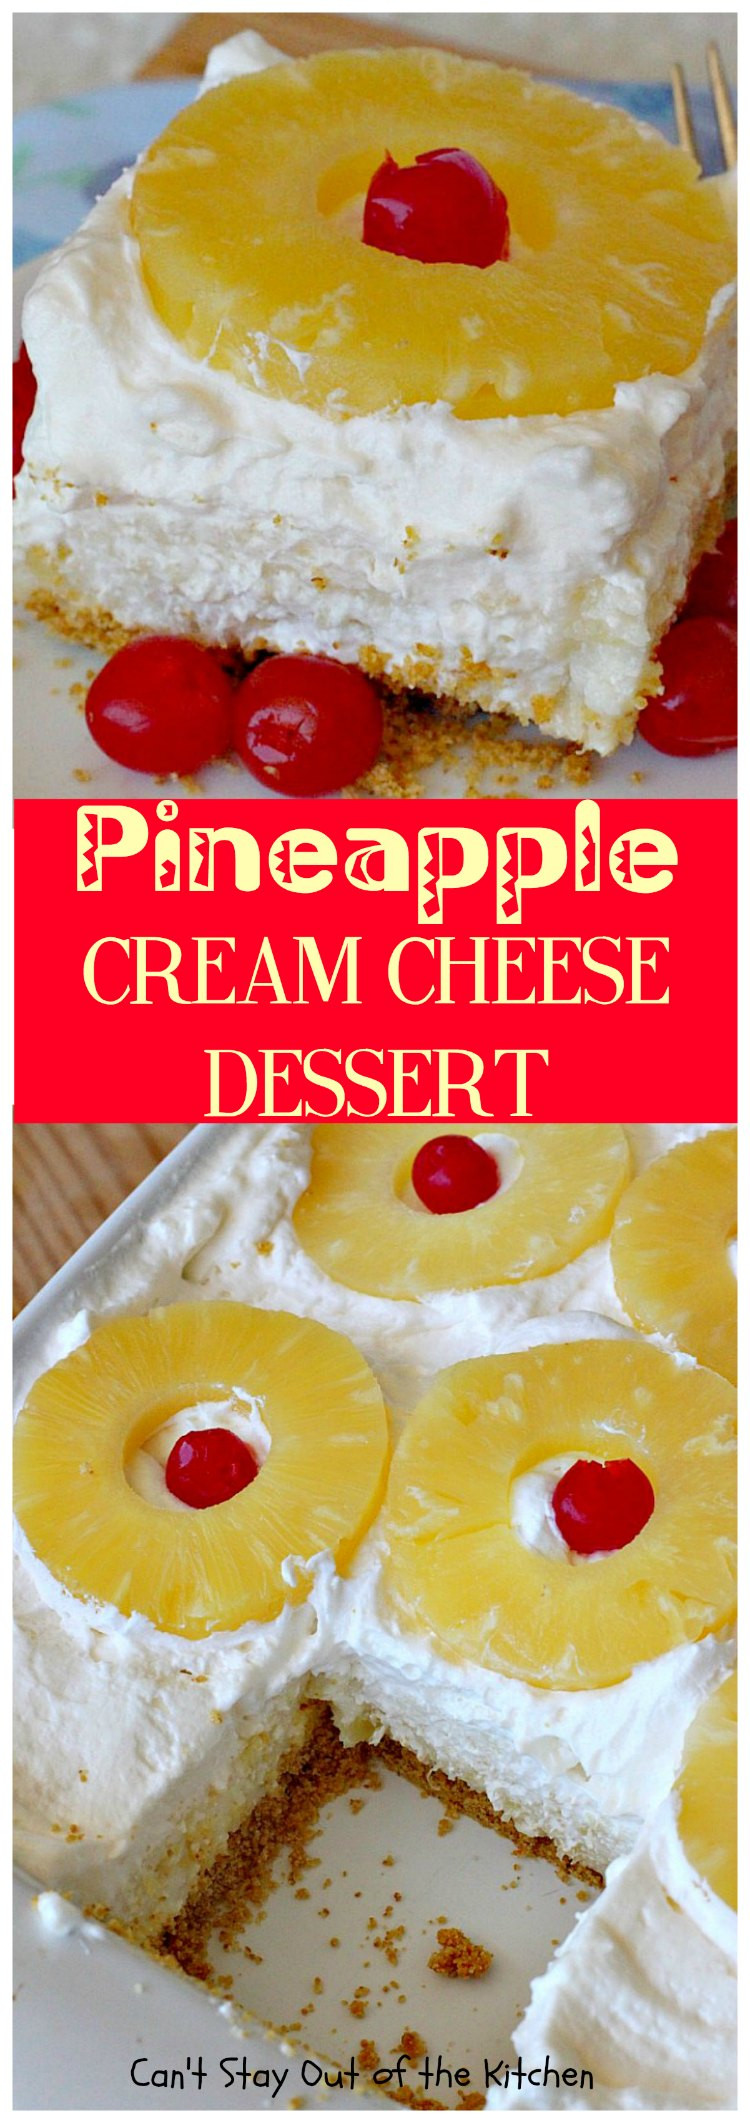 Cream Cheese Desserts
 Pineapple Cream Cheese Dessert – Can t Stay Out of the Kitchen